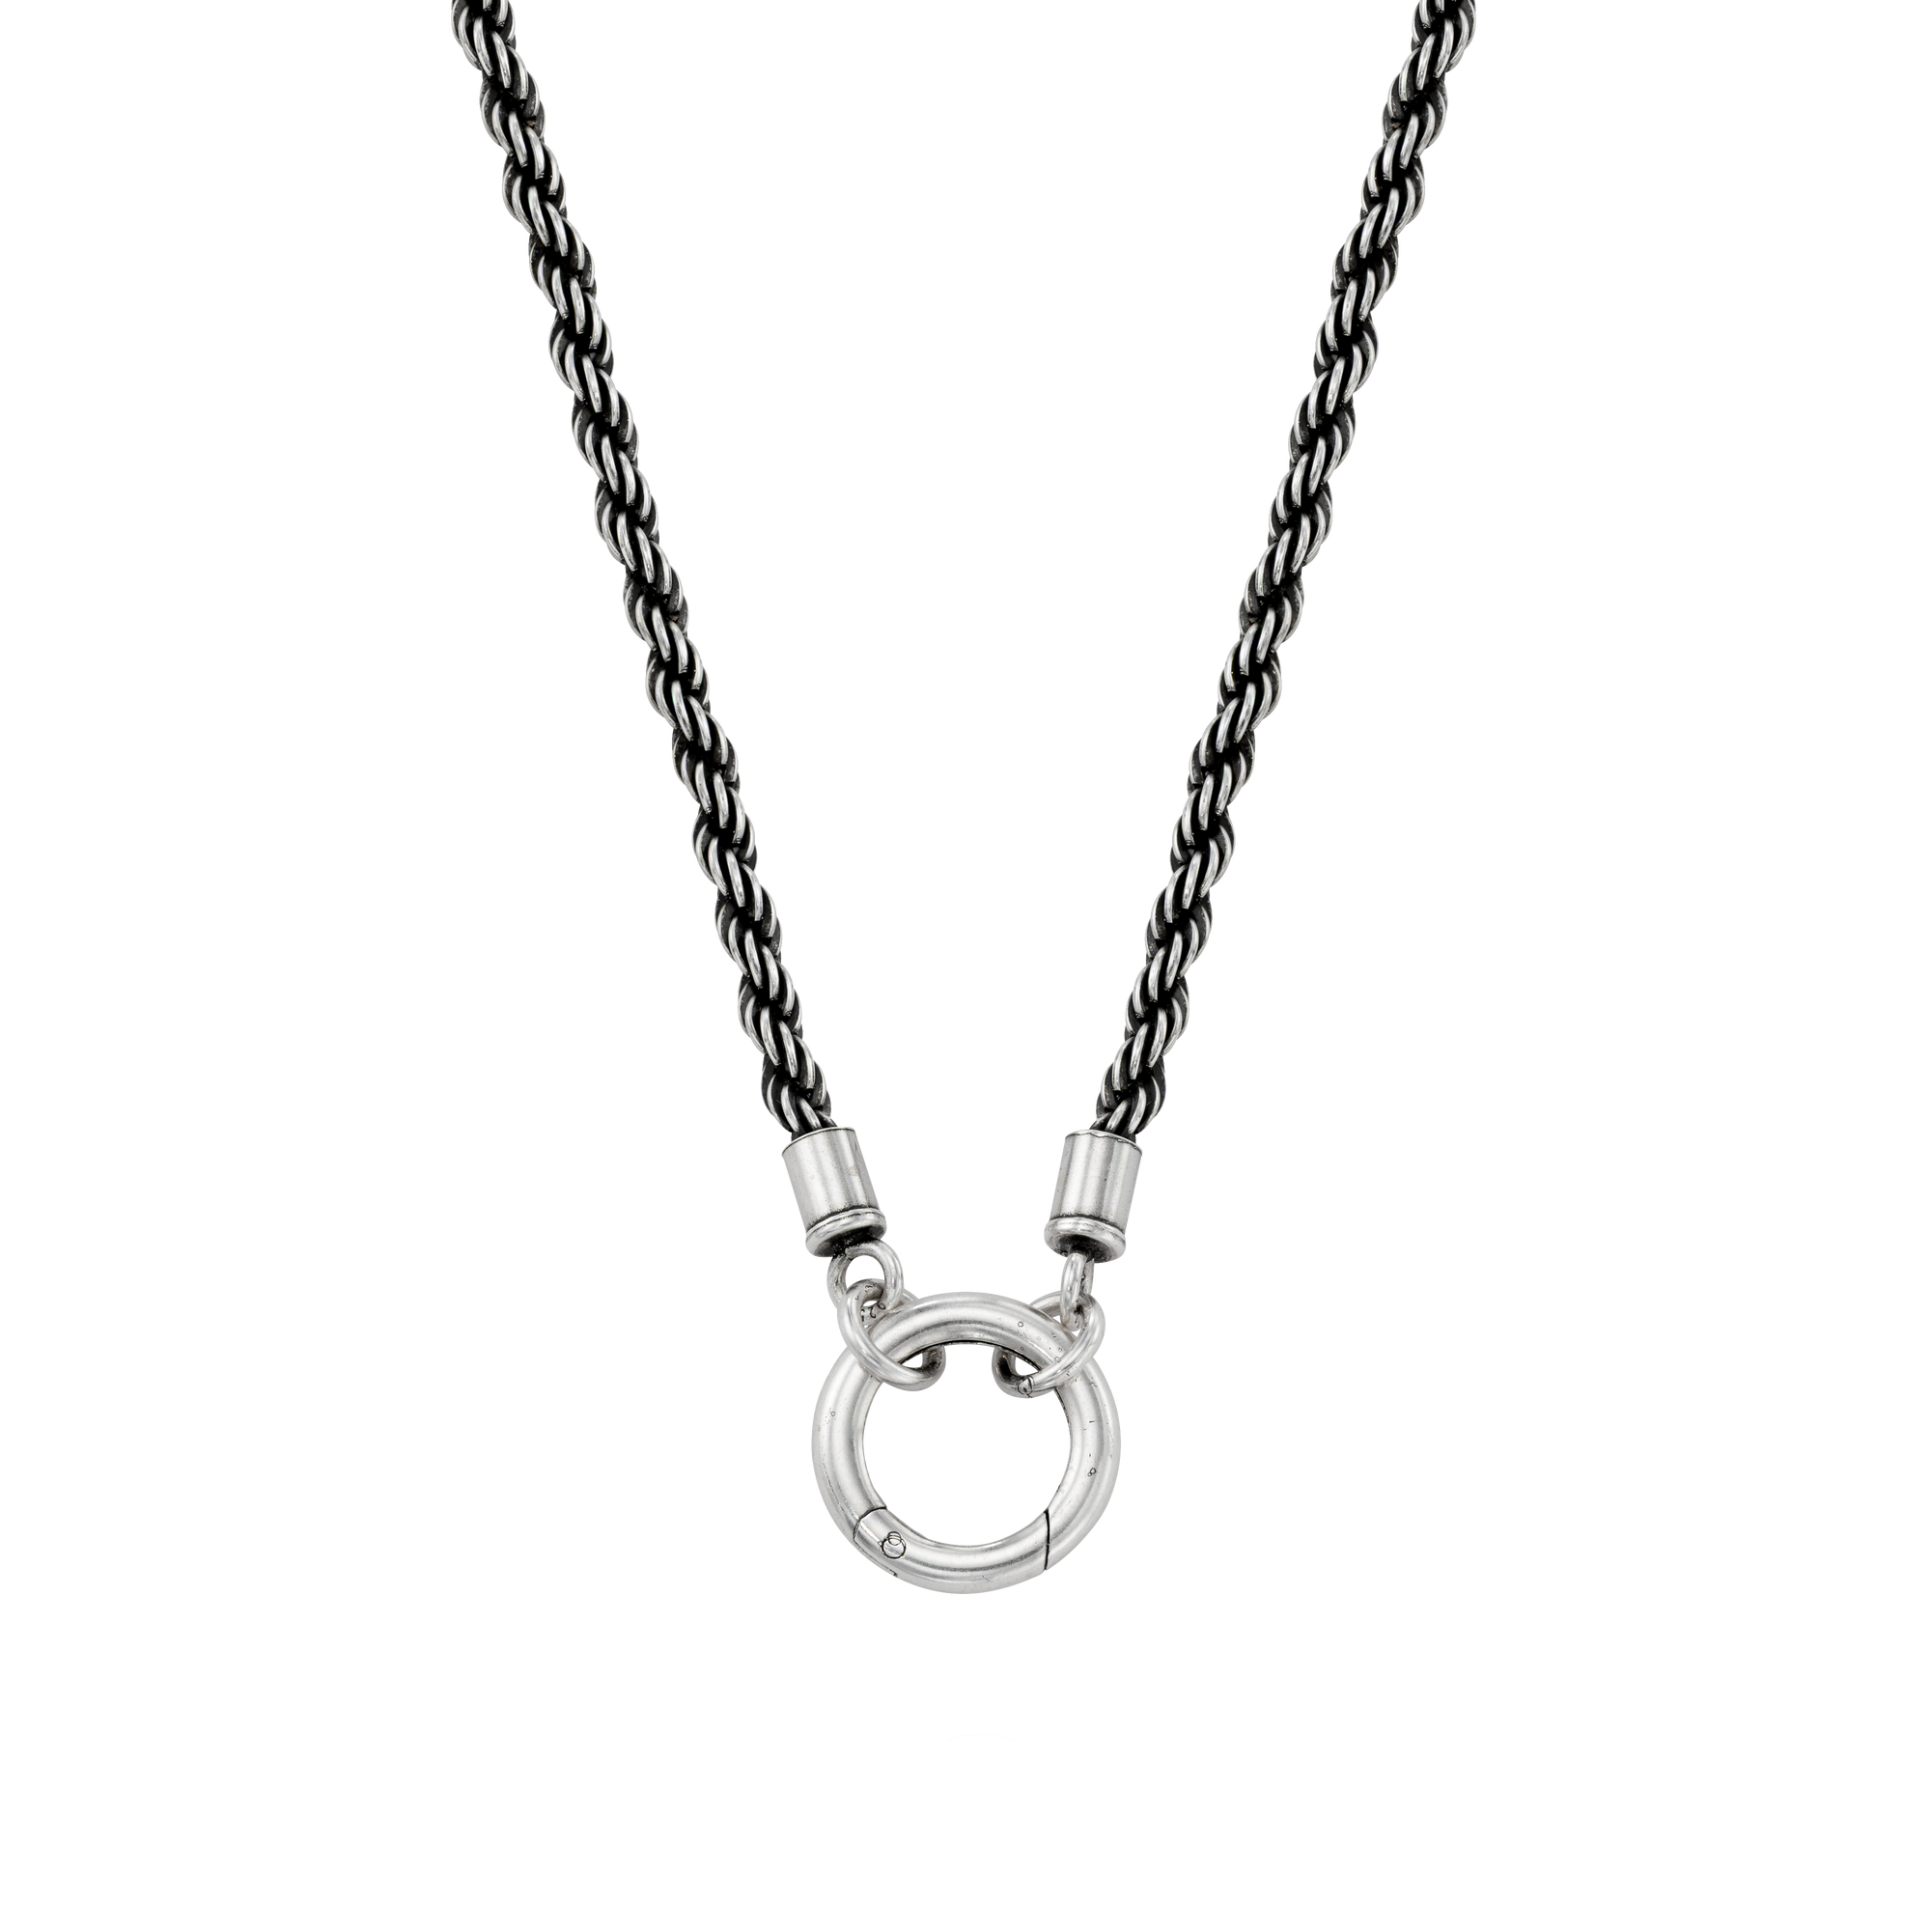 Inspired Essentials Rope Chain Loop Charm Necklace - 18"